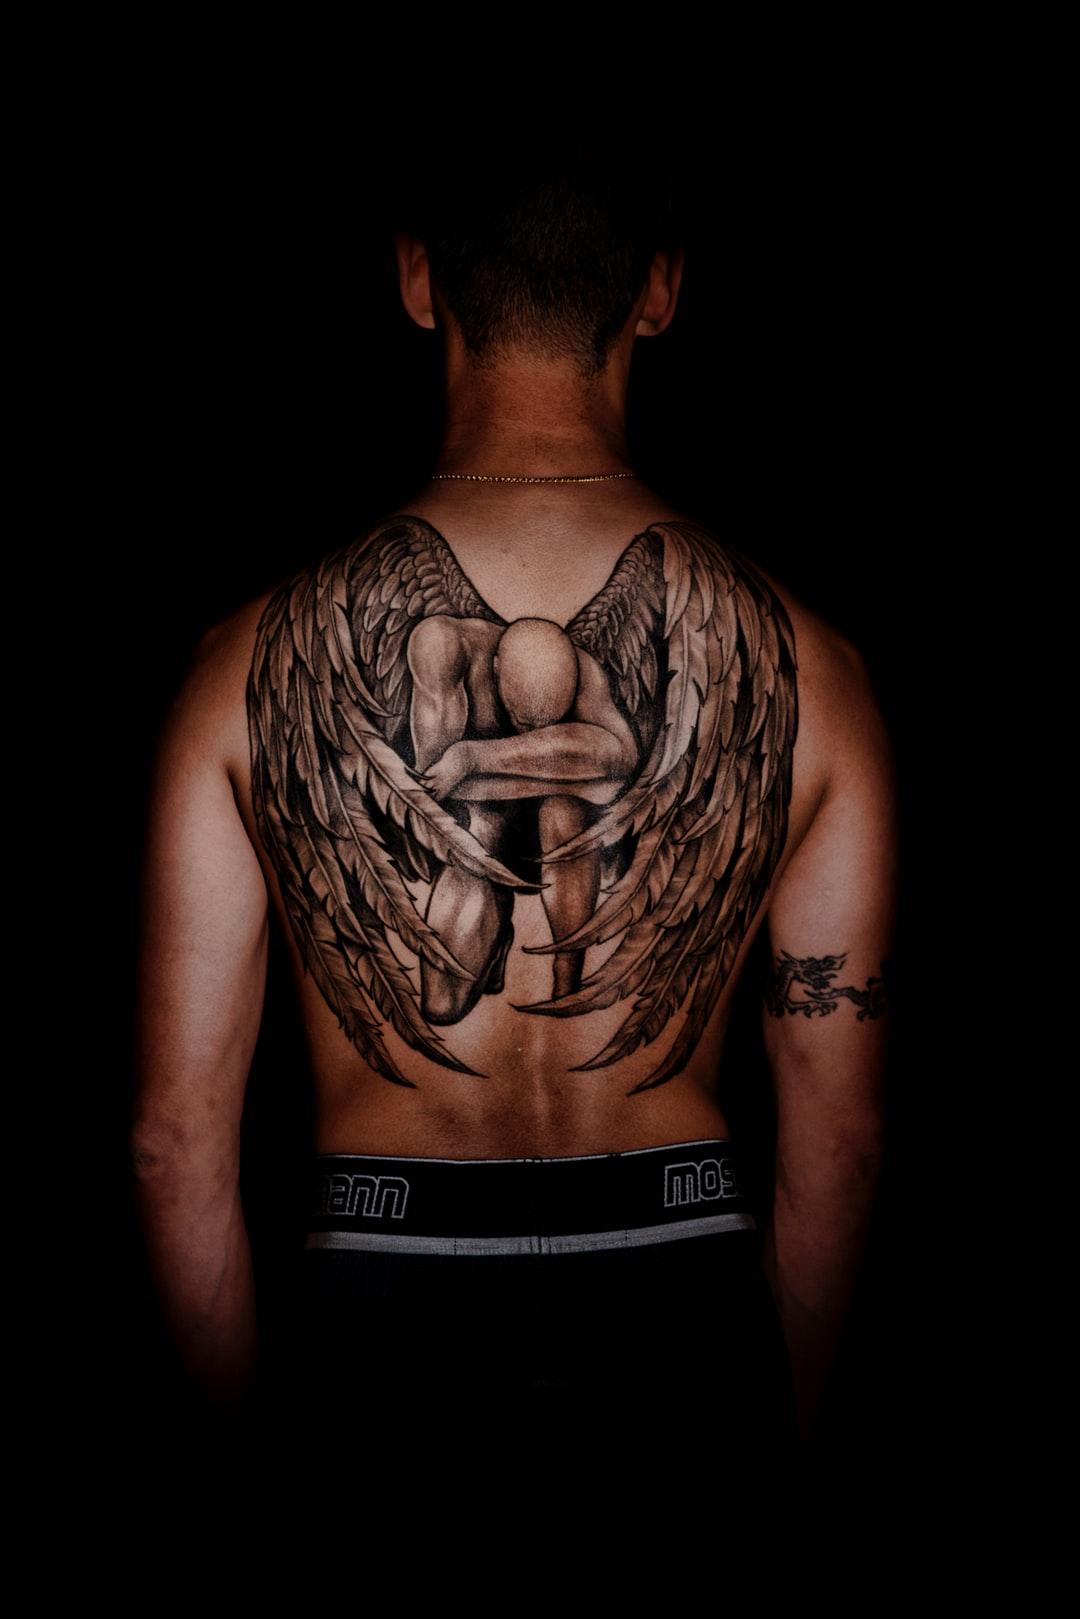 Tattoo Image: Download HD Picture & Photo